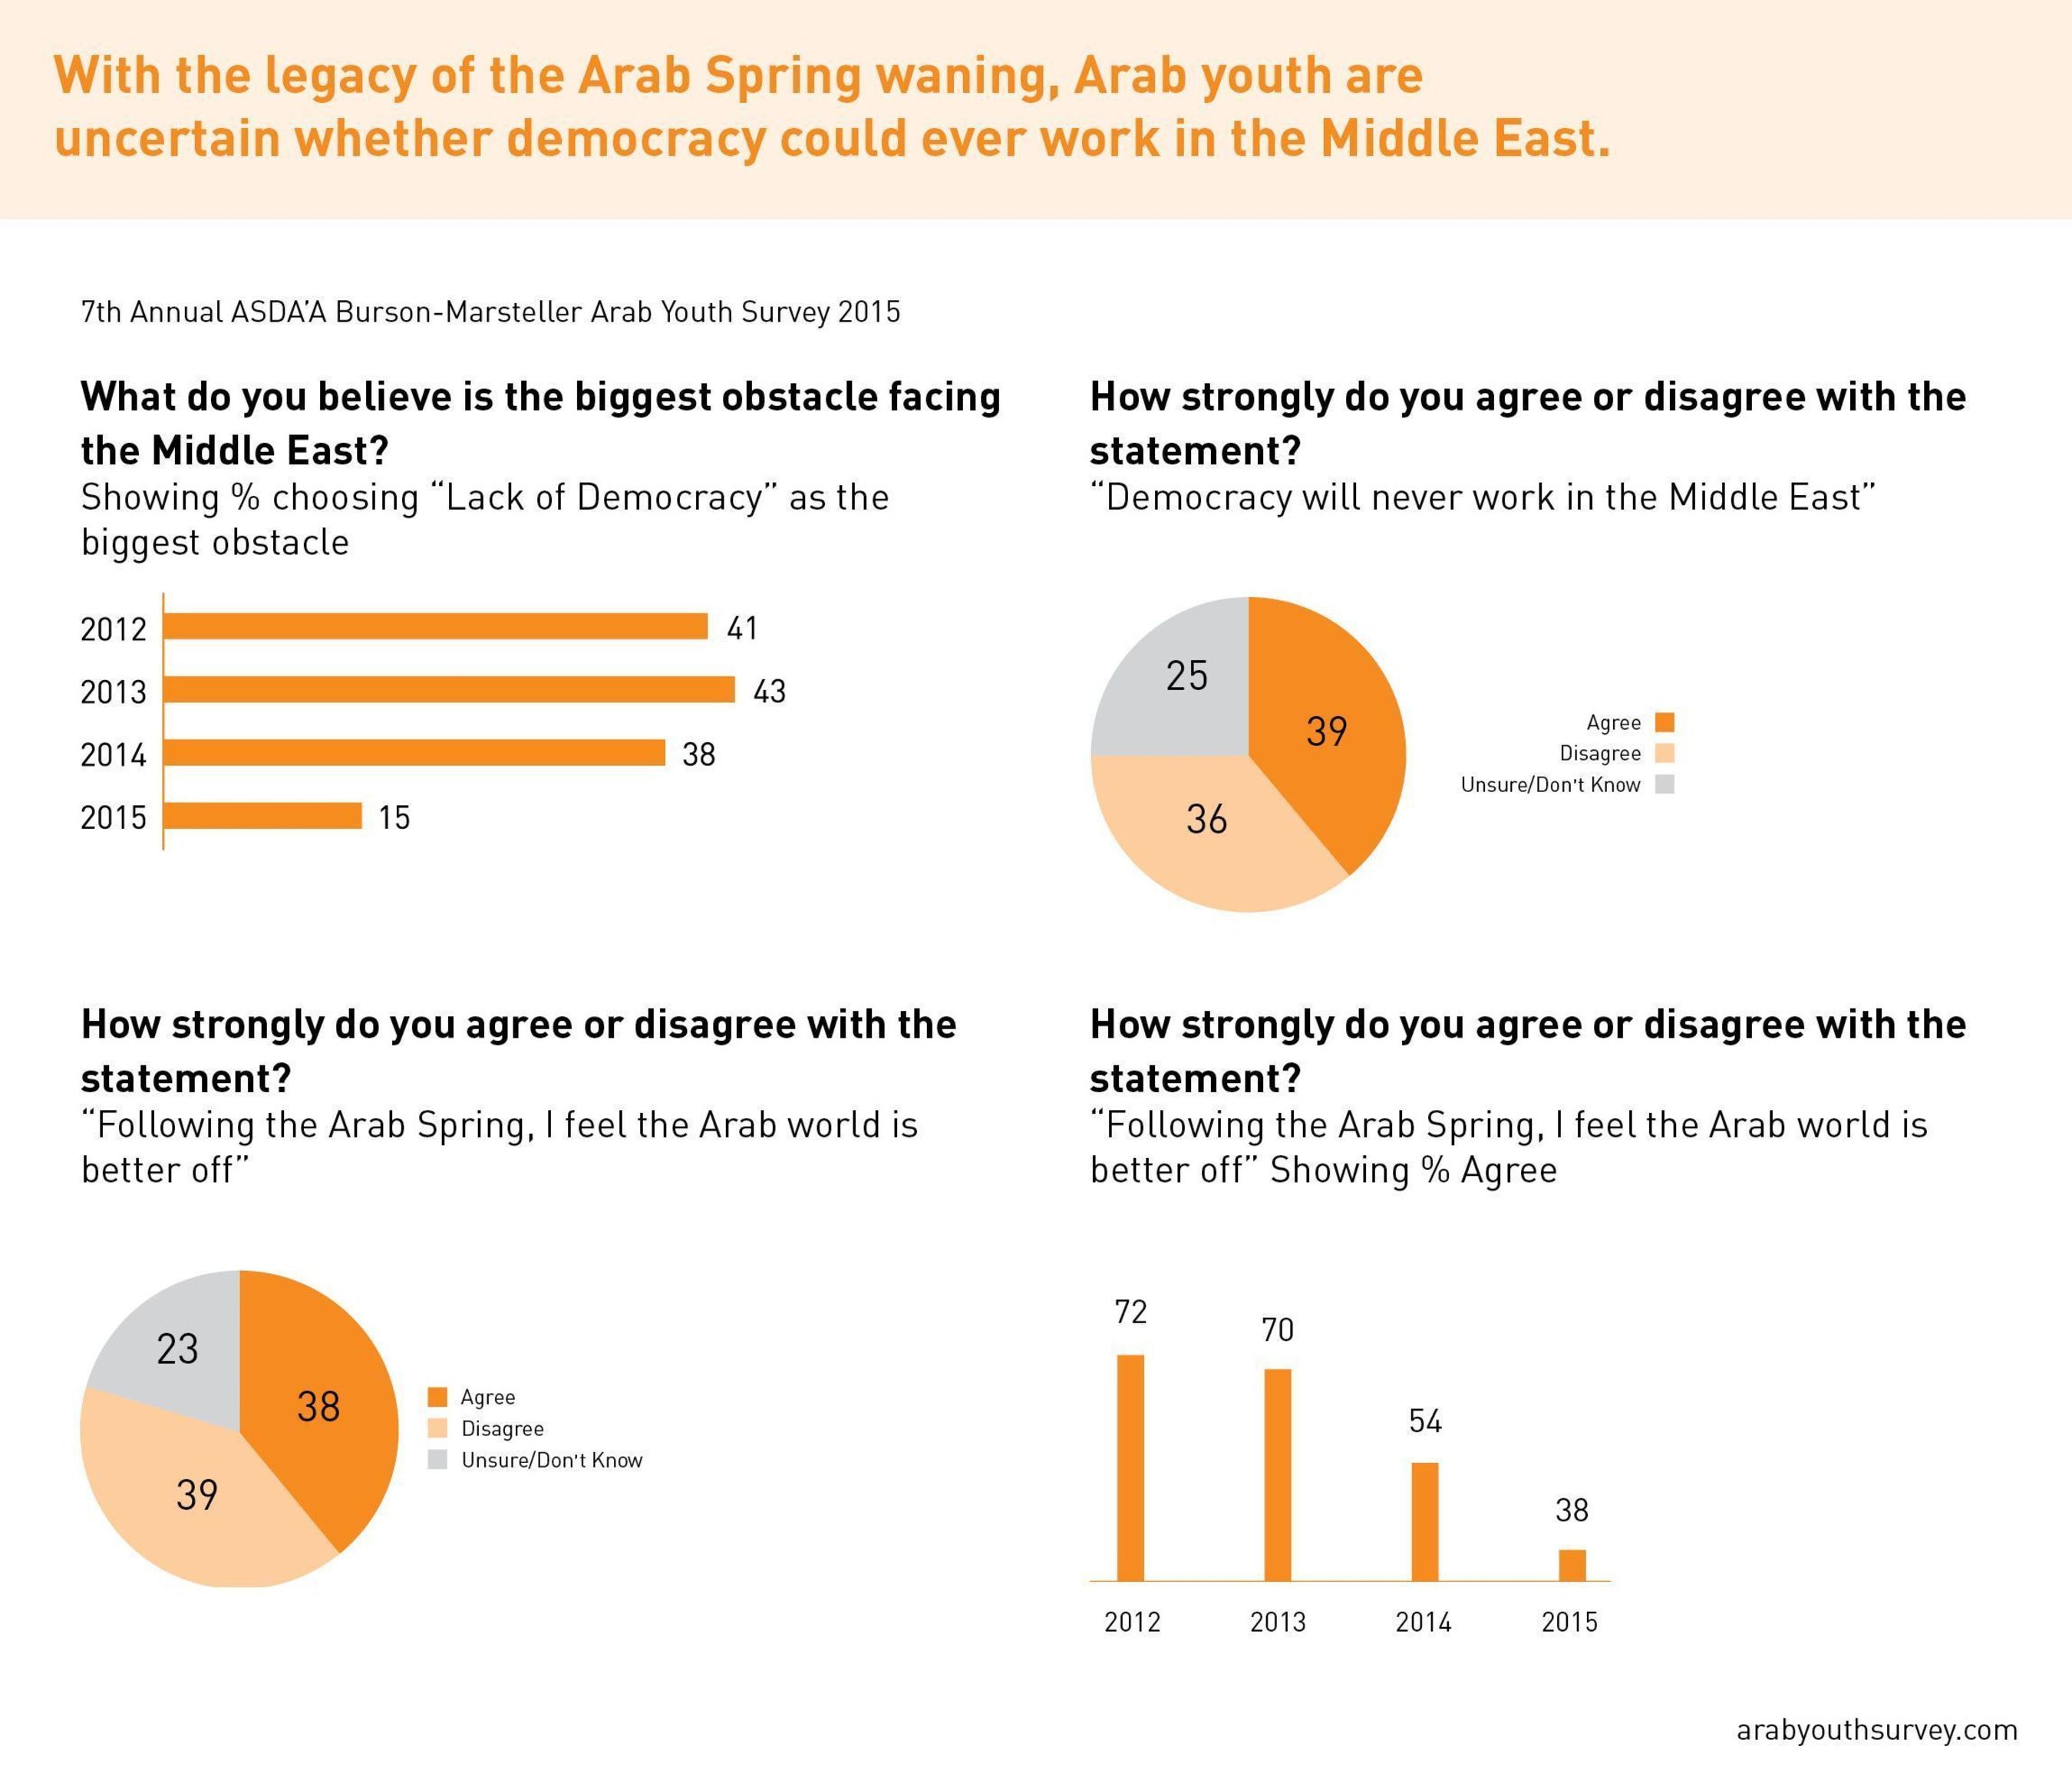 With the legacy of the Arab Spring waning, Arab youth are uncertain whether democracy could ever work in the Middle East (PRNewsFoto/ASDA'A Burson-Marsteller)